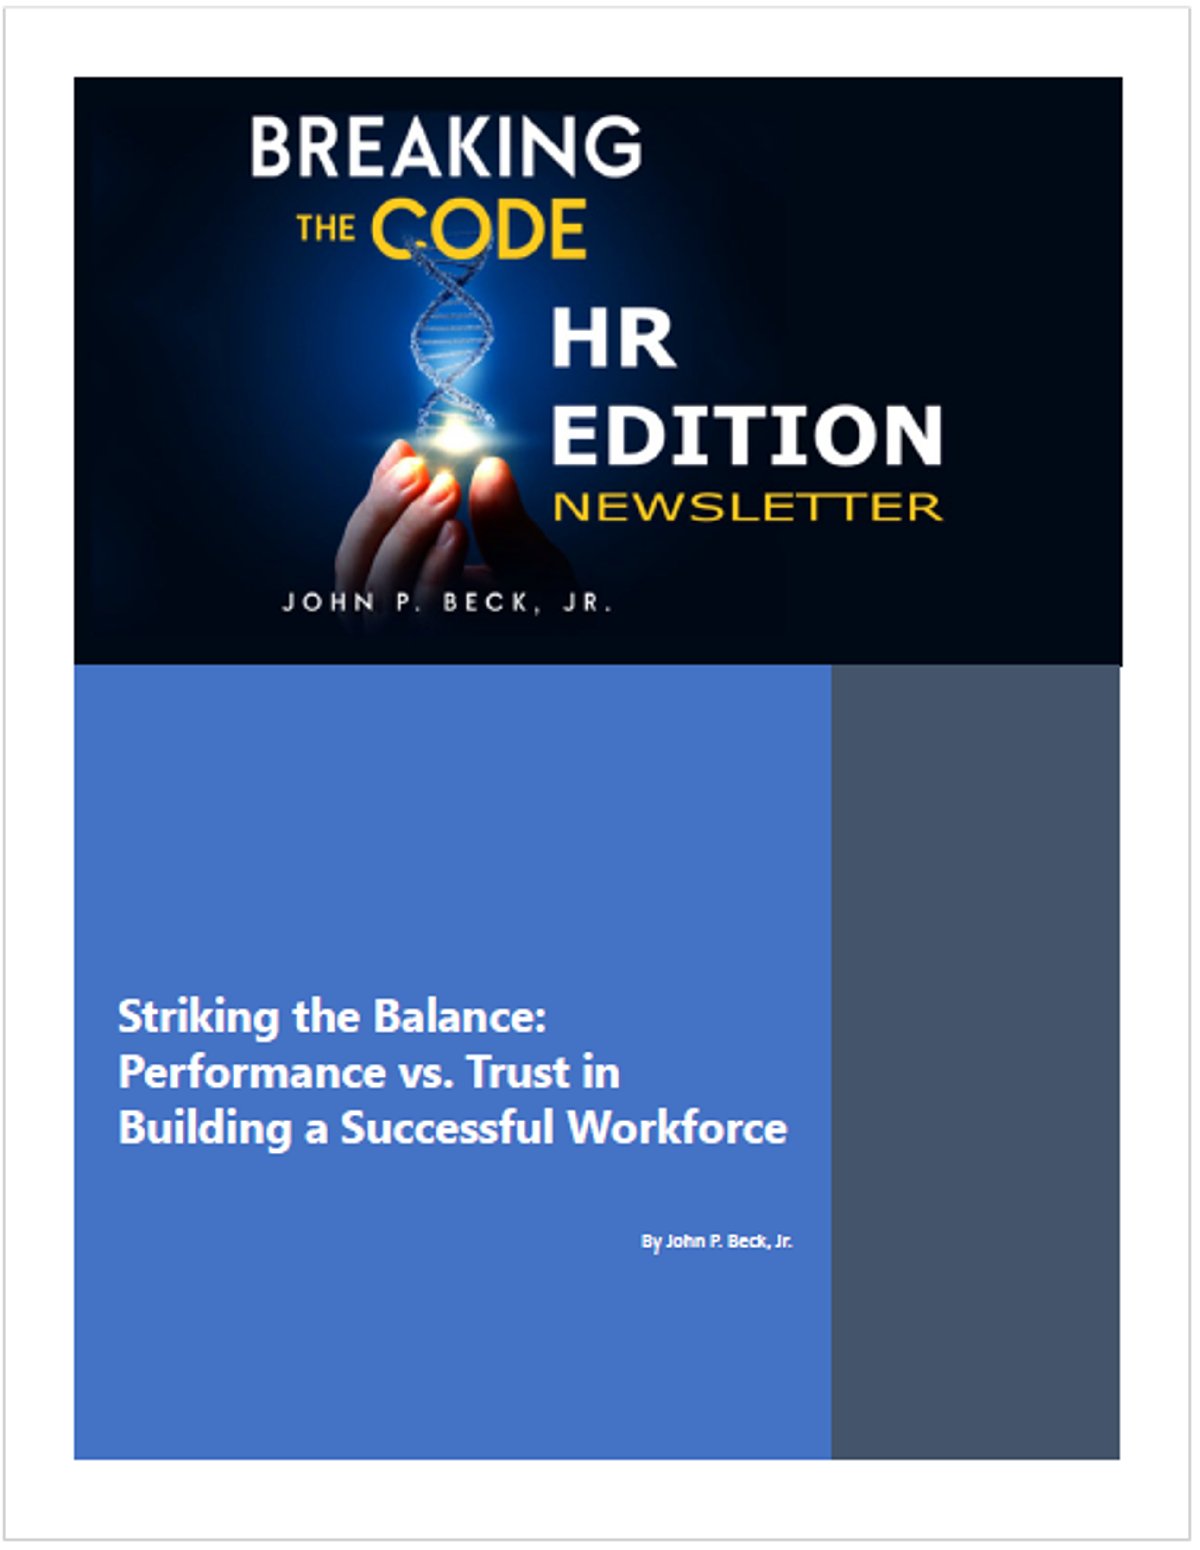 Striking the Balance: Performance vs. Trust in Building a Successful Workforce